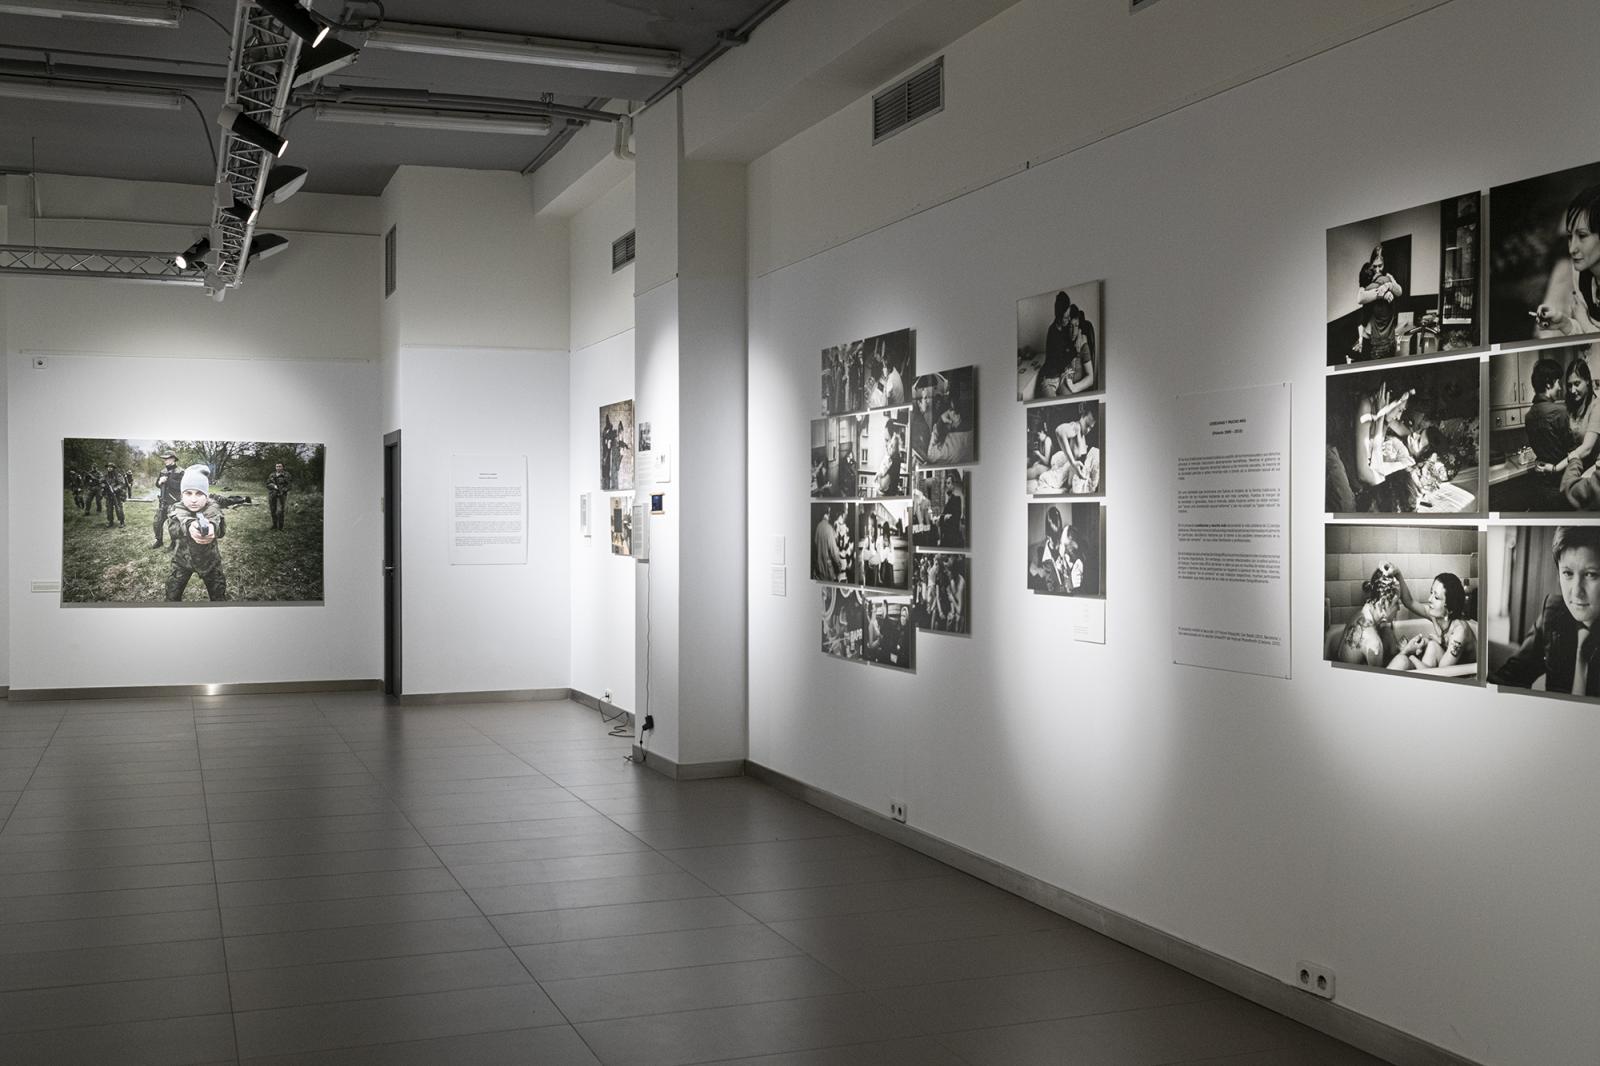 Solo exhibition at the Sala EFTI, International Center of Photography and Cinema